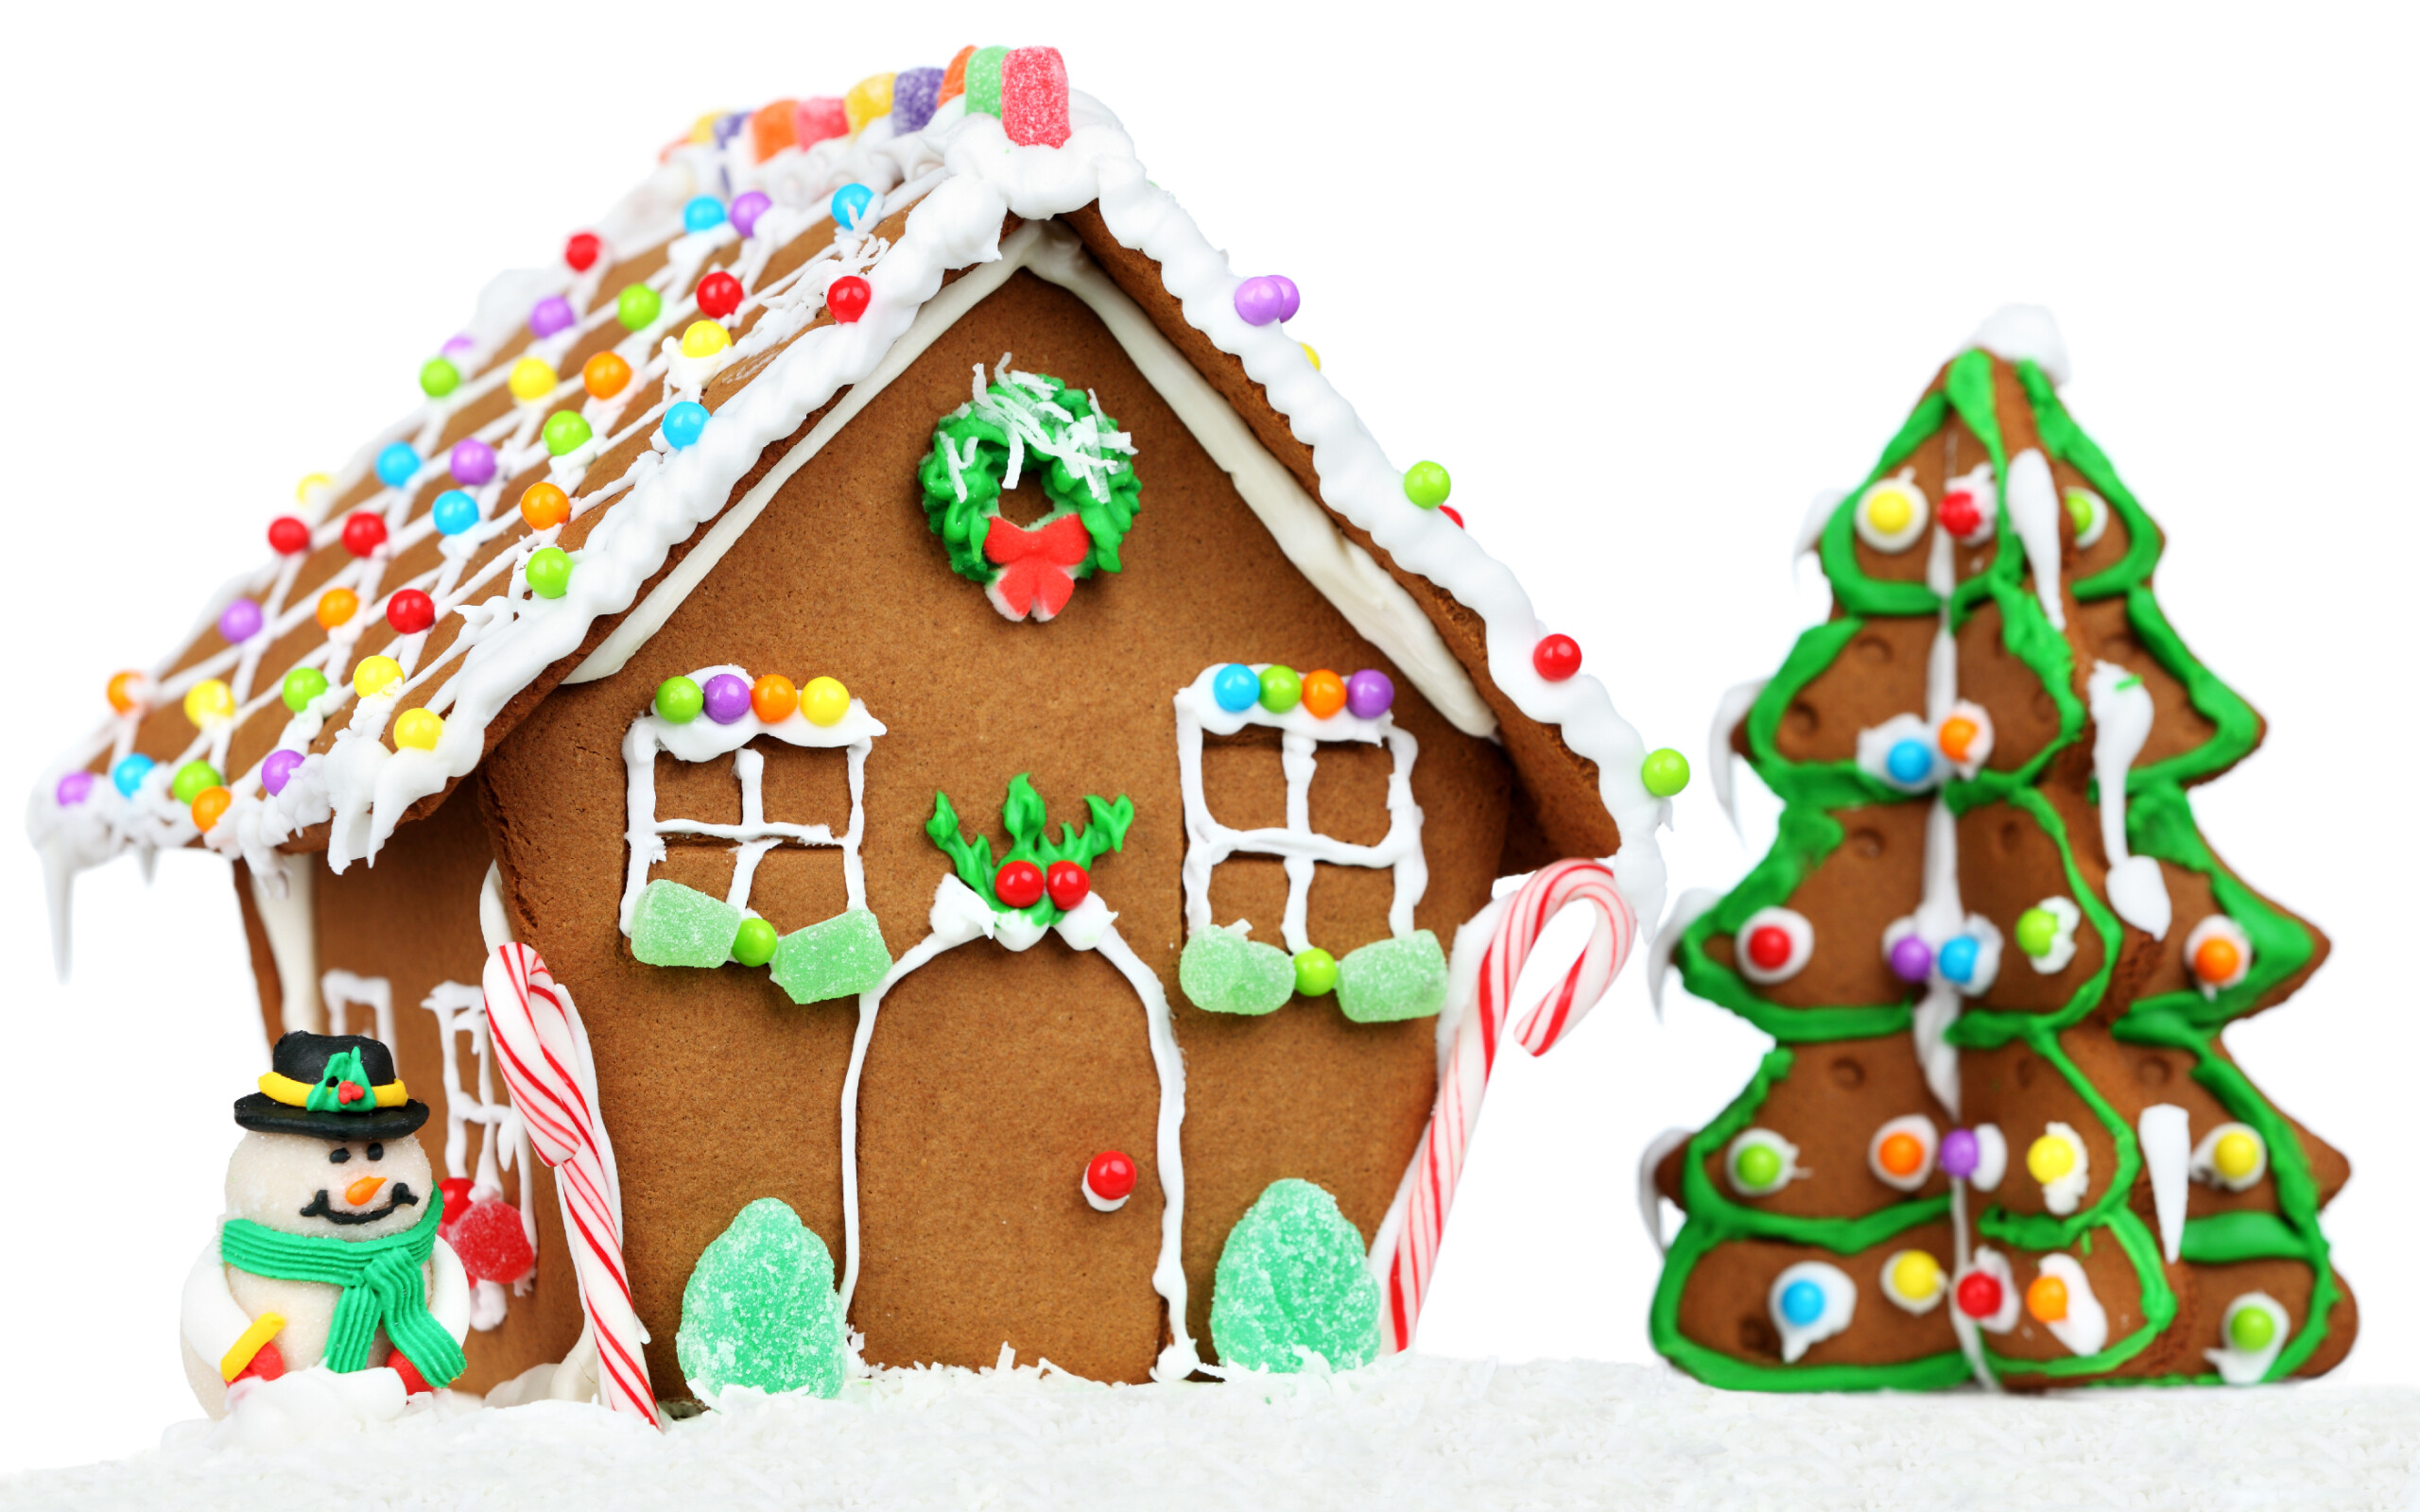 Gingerbread House: Gumdrops, M&Ms, Candy canes, Gingerbread Christmas tree ornaments. 2560x1600 HD Background.